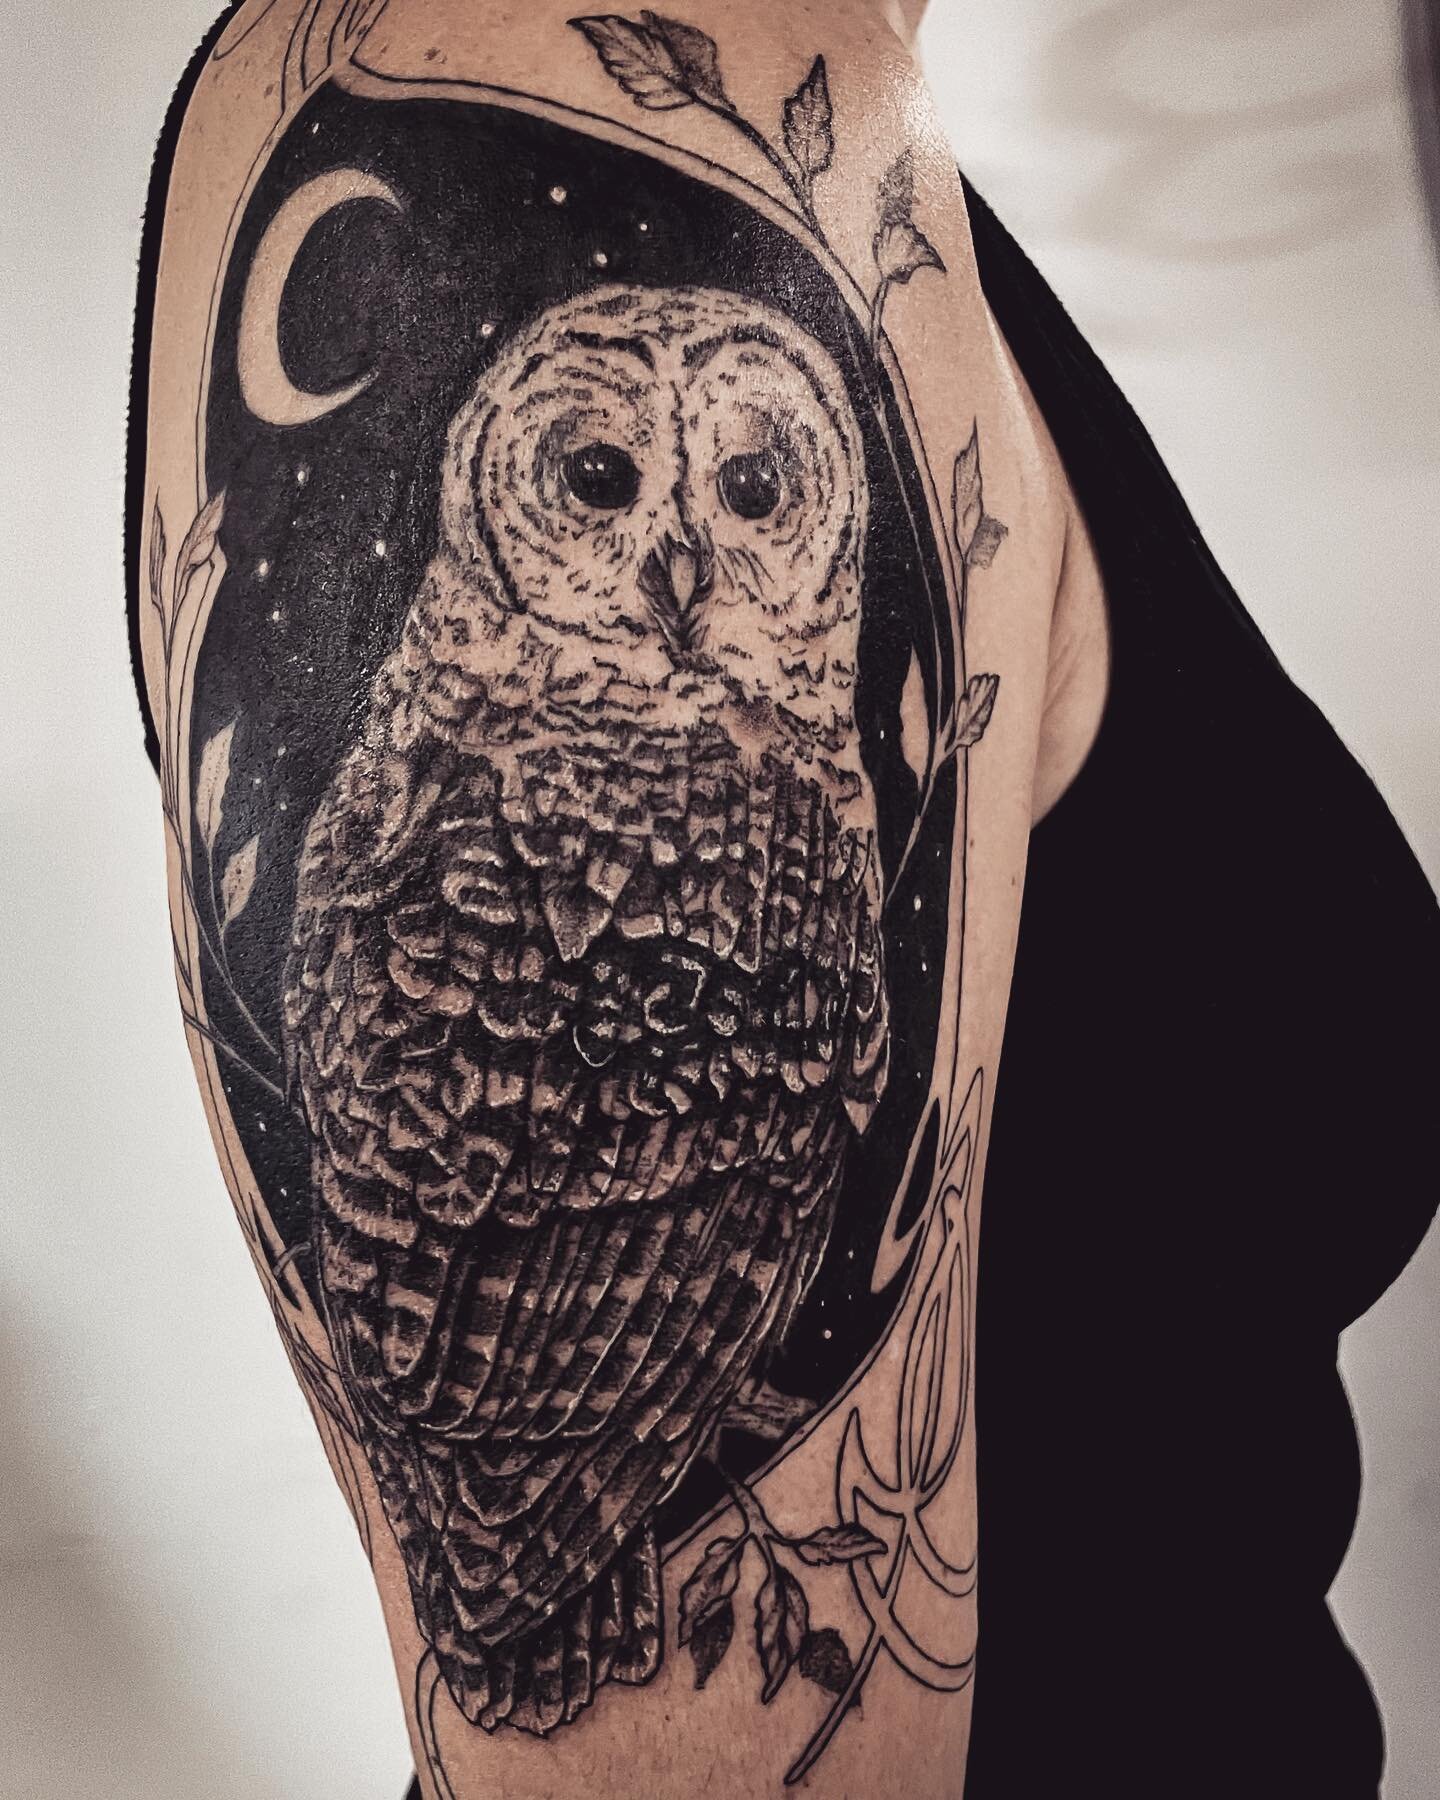 Finally finished this owl coverup! Thanks for geeking out on Star Wars stuff with me, Sarah! 
&bull;
&bull;
&bull;
#owltattoo #blacktattoomag #blxckink #blackworkers #tattoosofinstagram #birdtattoo #christenwolfe